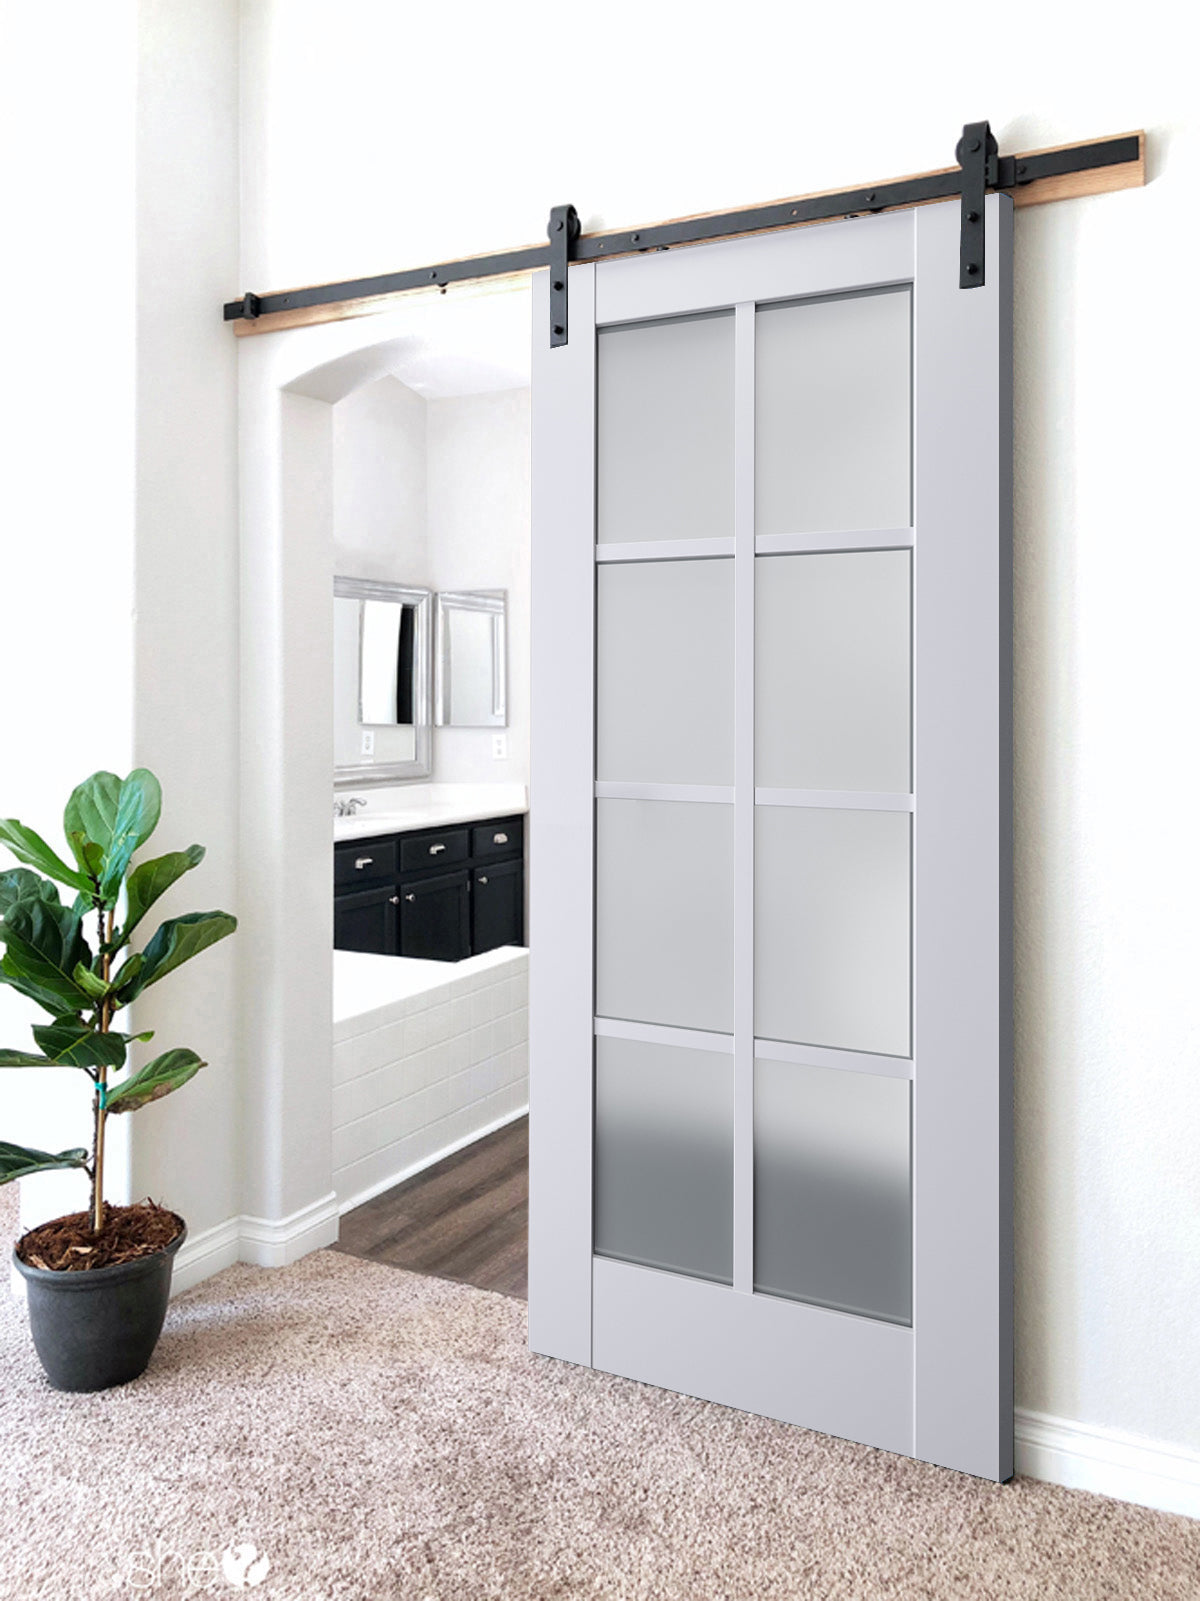 Veregio 7412 Matte White Barn Door with Frosted Glass and Black Rail